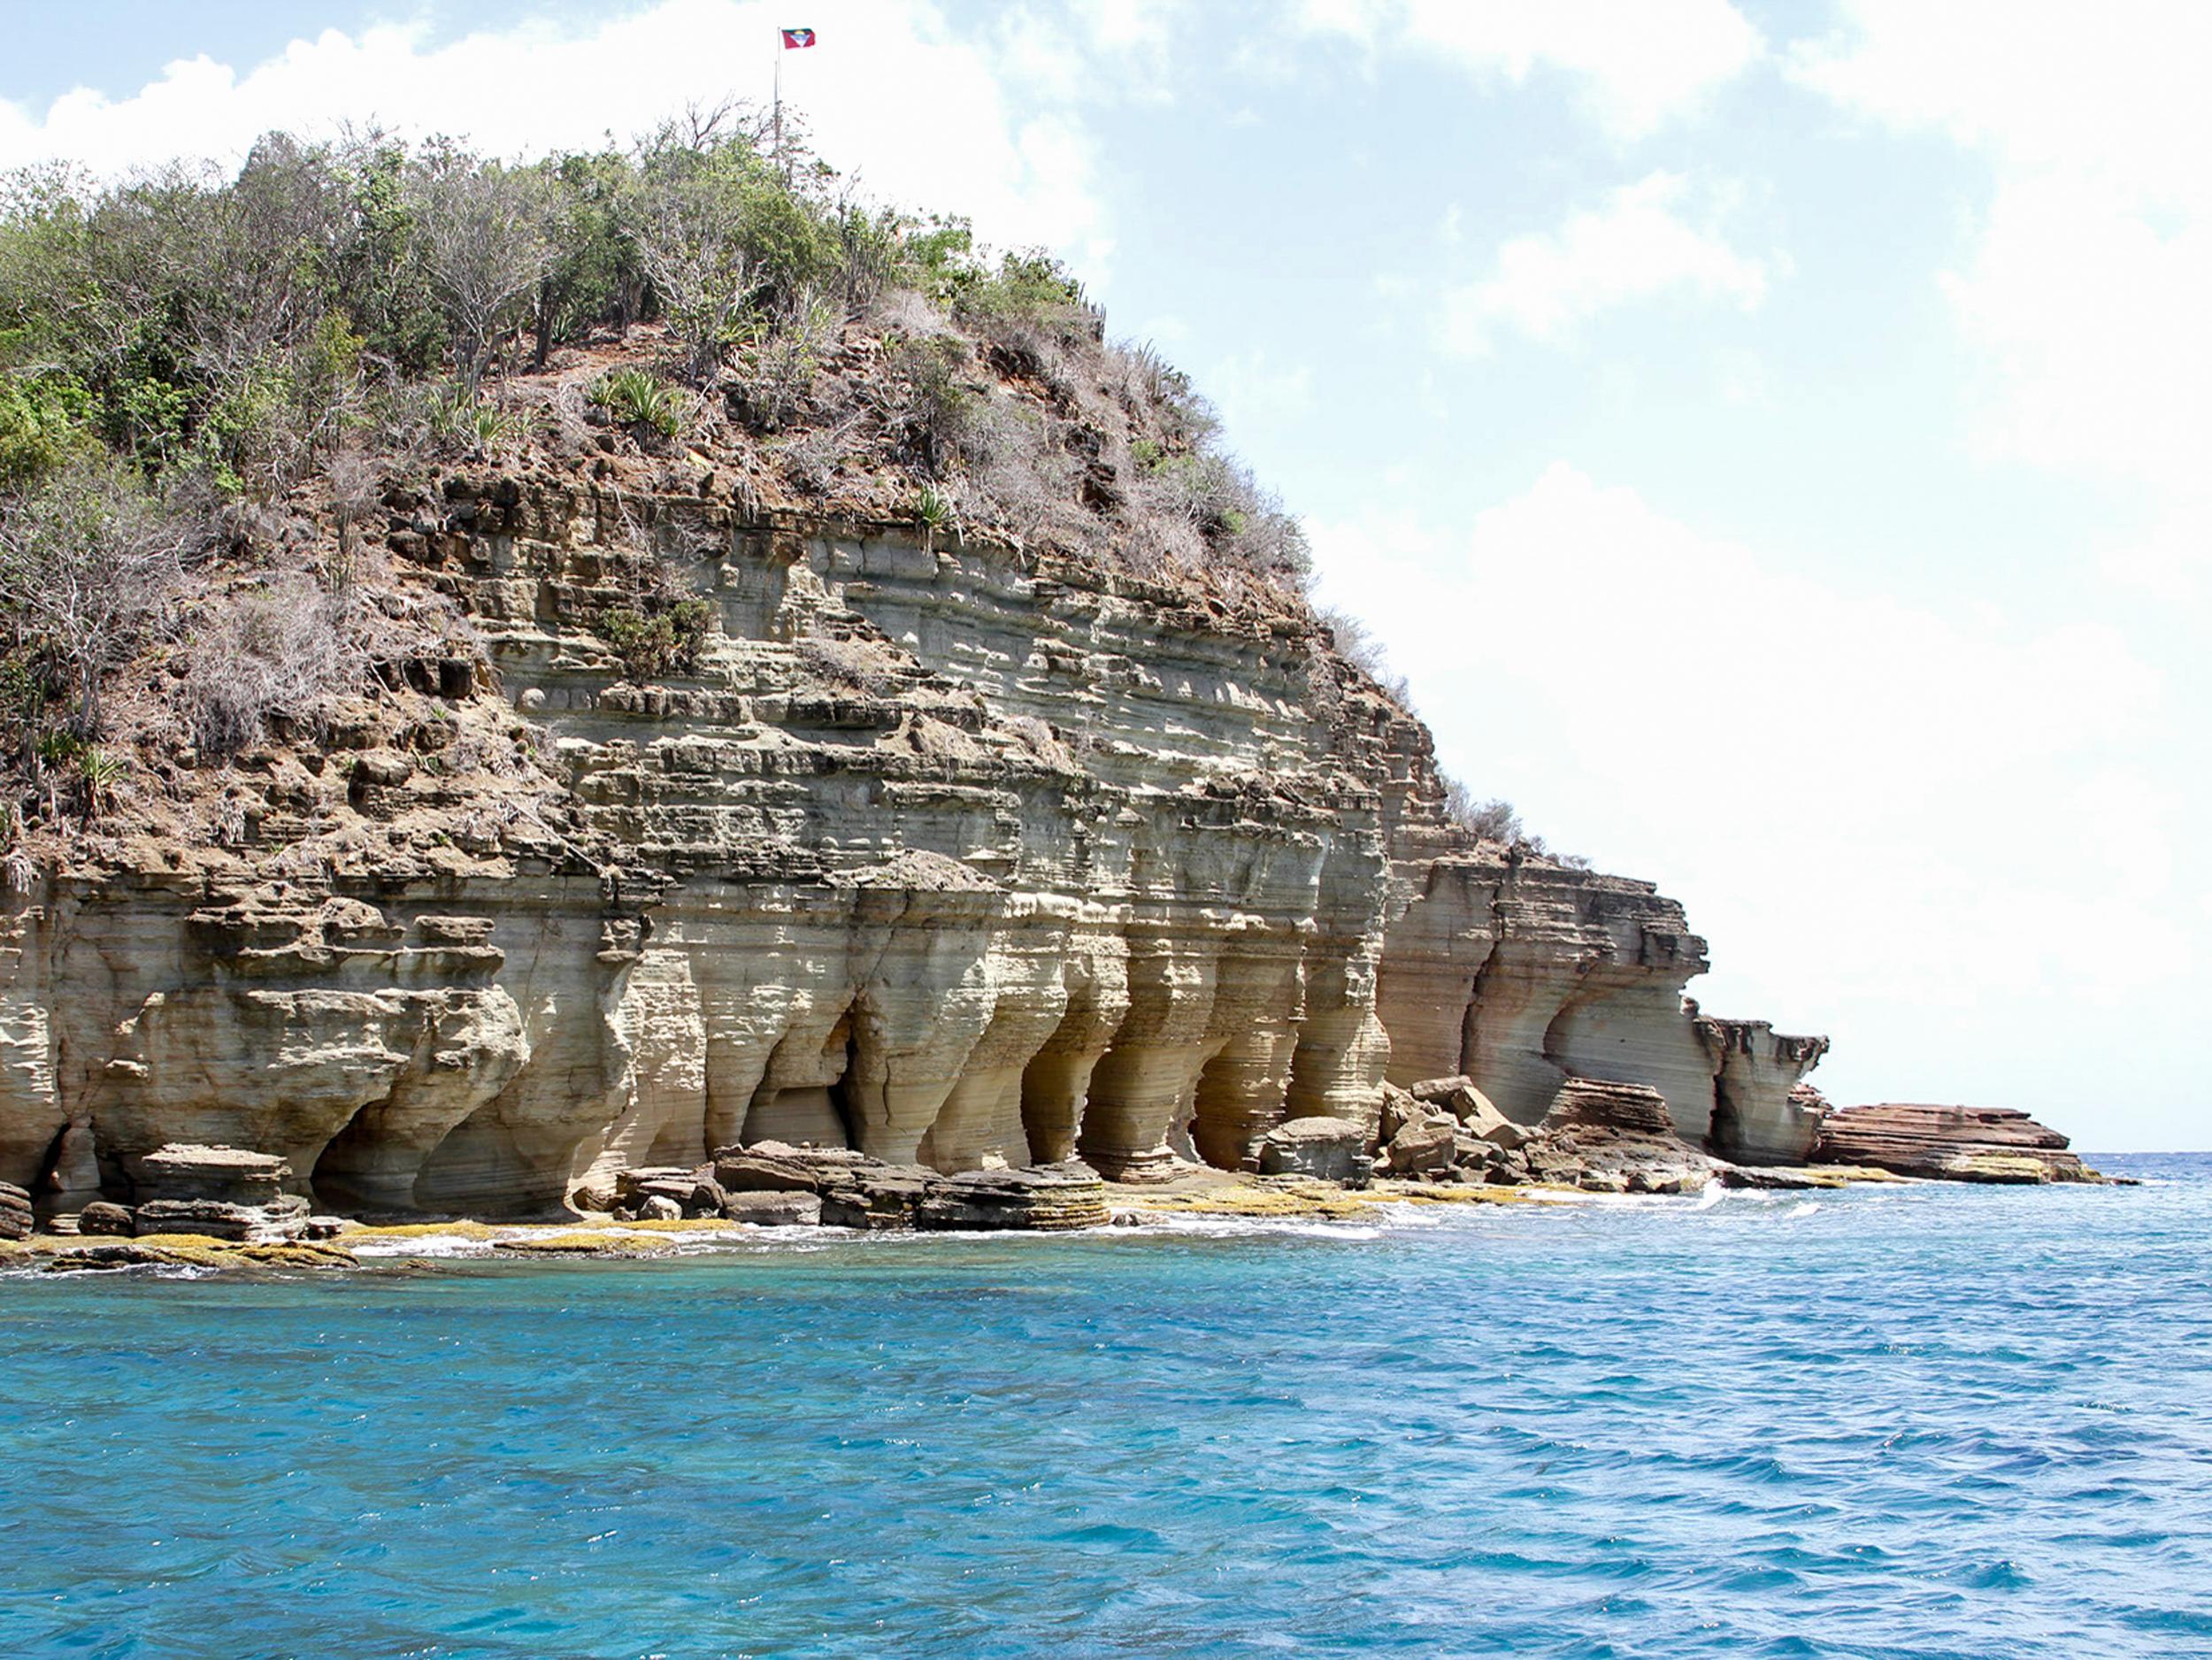 The Pillars of Hercules are a great snorkelling spot